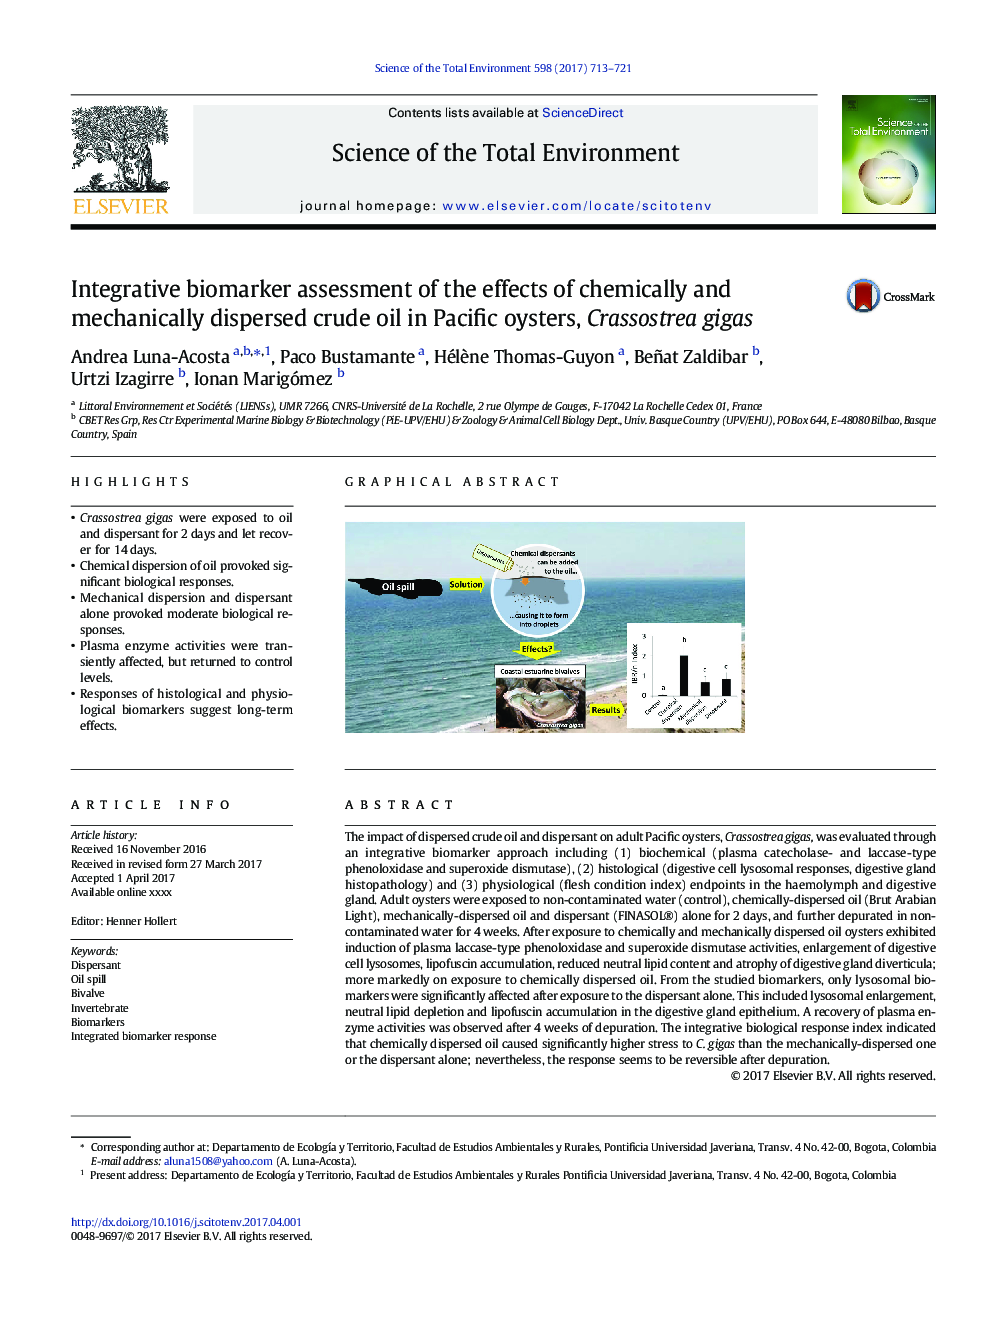 Integrative biomarker assessment of the effects of chemically and mechanically dispersed crude oil in Pacific oysters, Crassostrea gigas